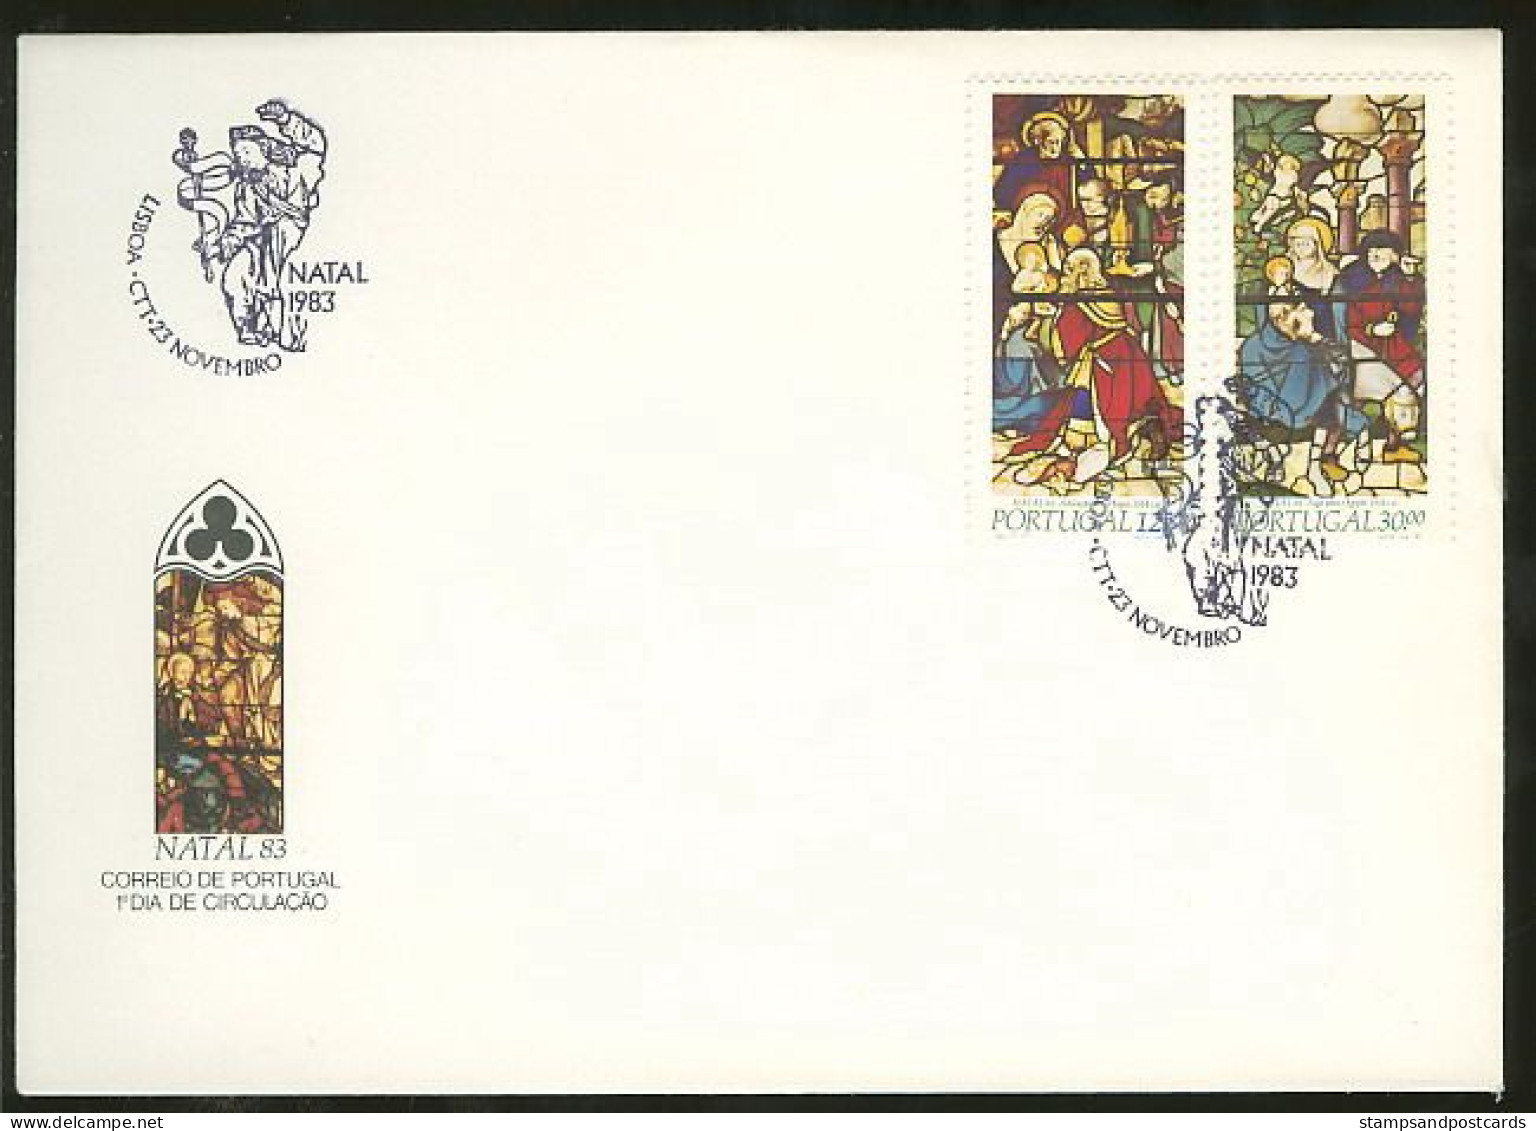 Portugal Vitraux Eglises Noel 1983 FDC Stained-glass From Churches Christmas 1983 FDC - Verres & Vitraux